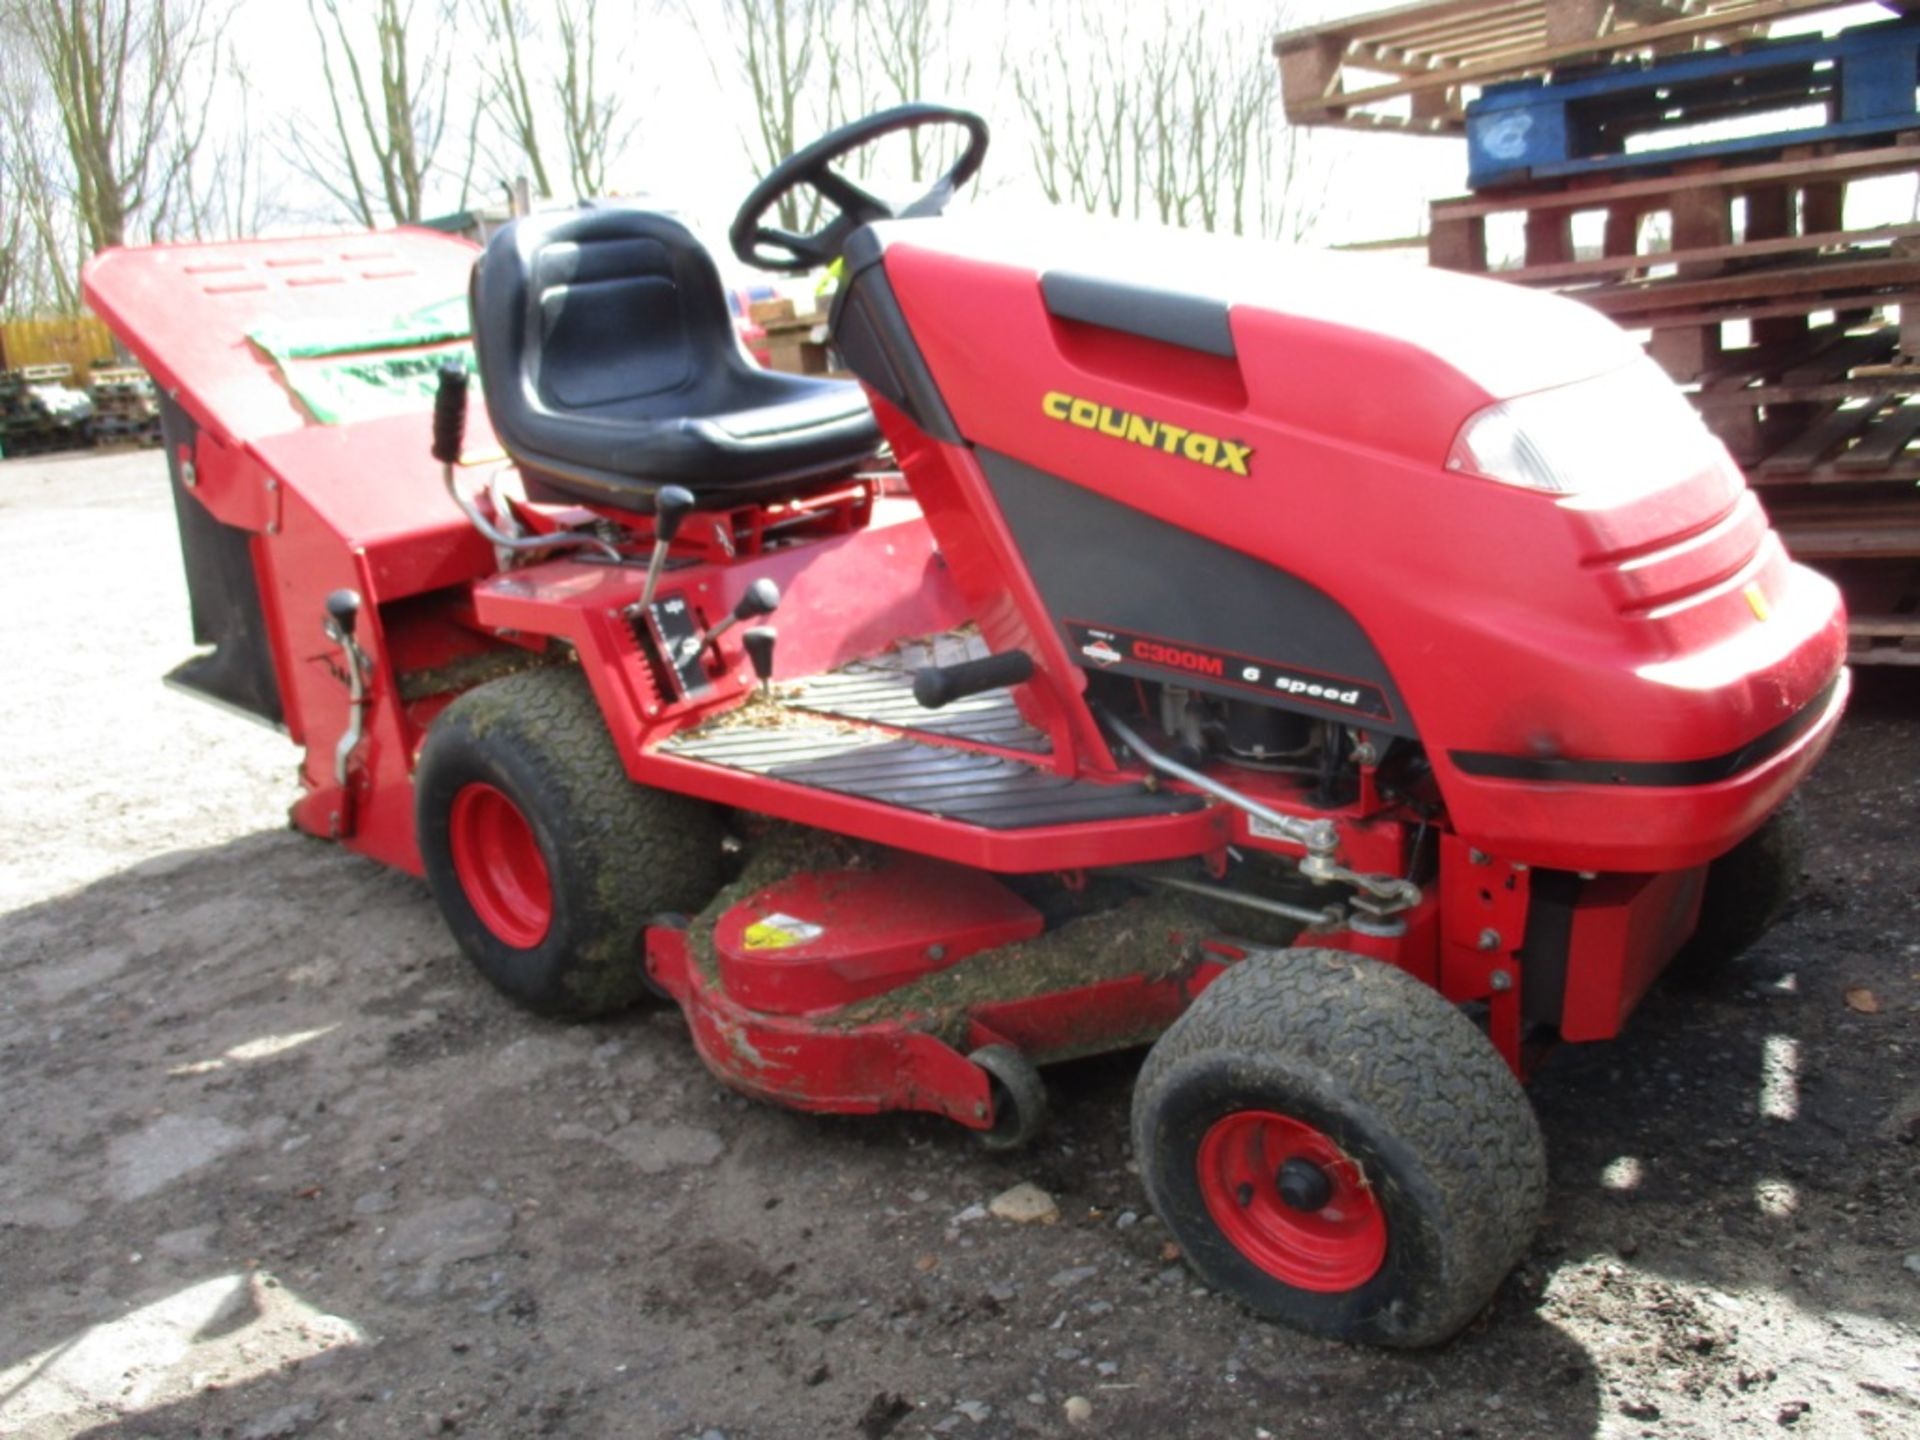 Countax C300M 6 speed garden tractor mower with collector